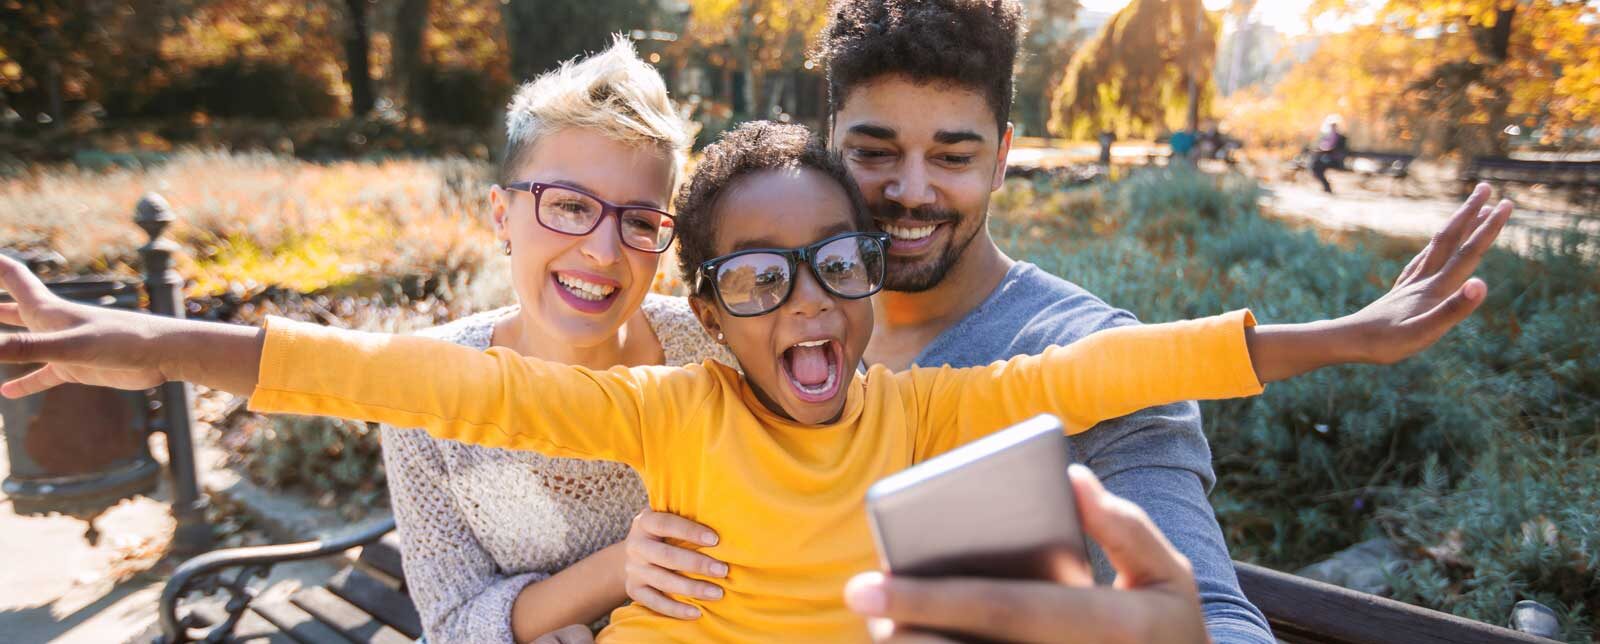 FAQs Frequently Asked Questions - Family at a park taking a selfie